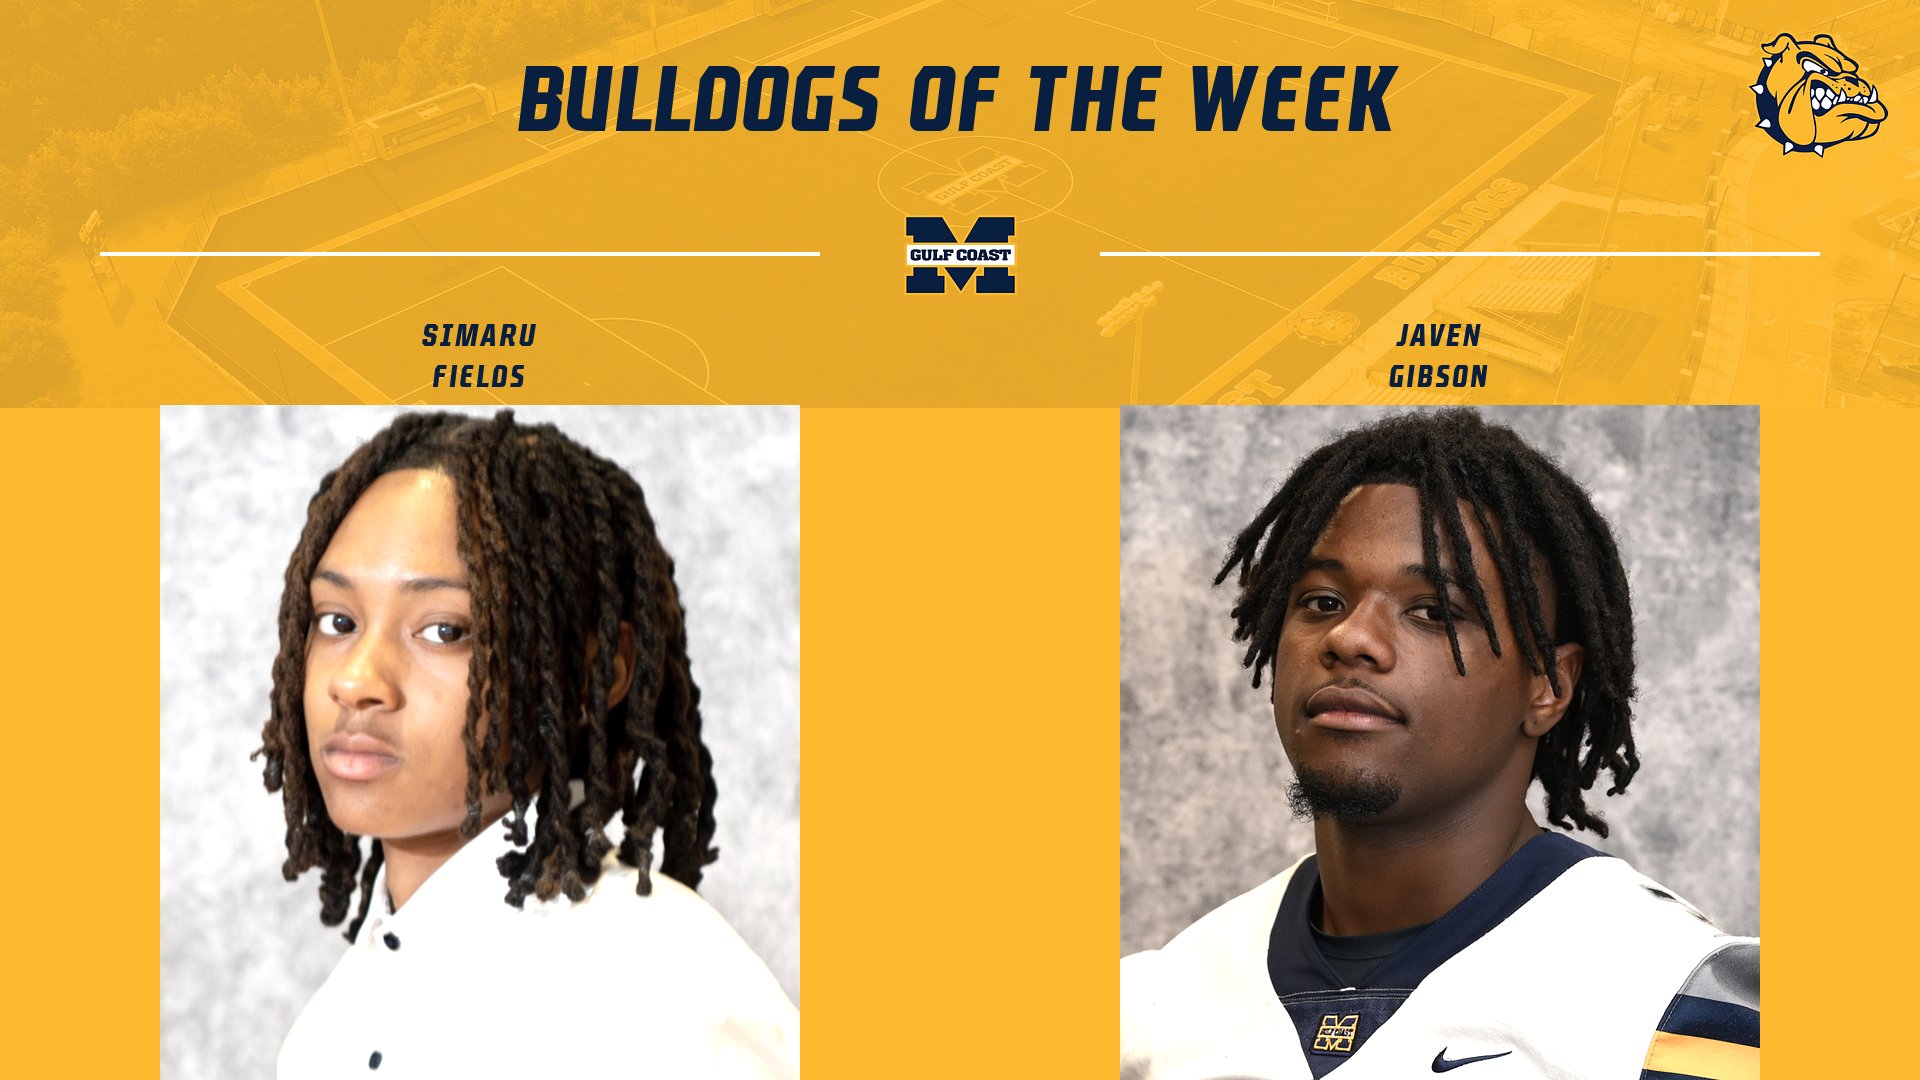 Fields, Gibson named Bulldogs of the Week